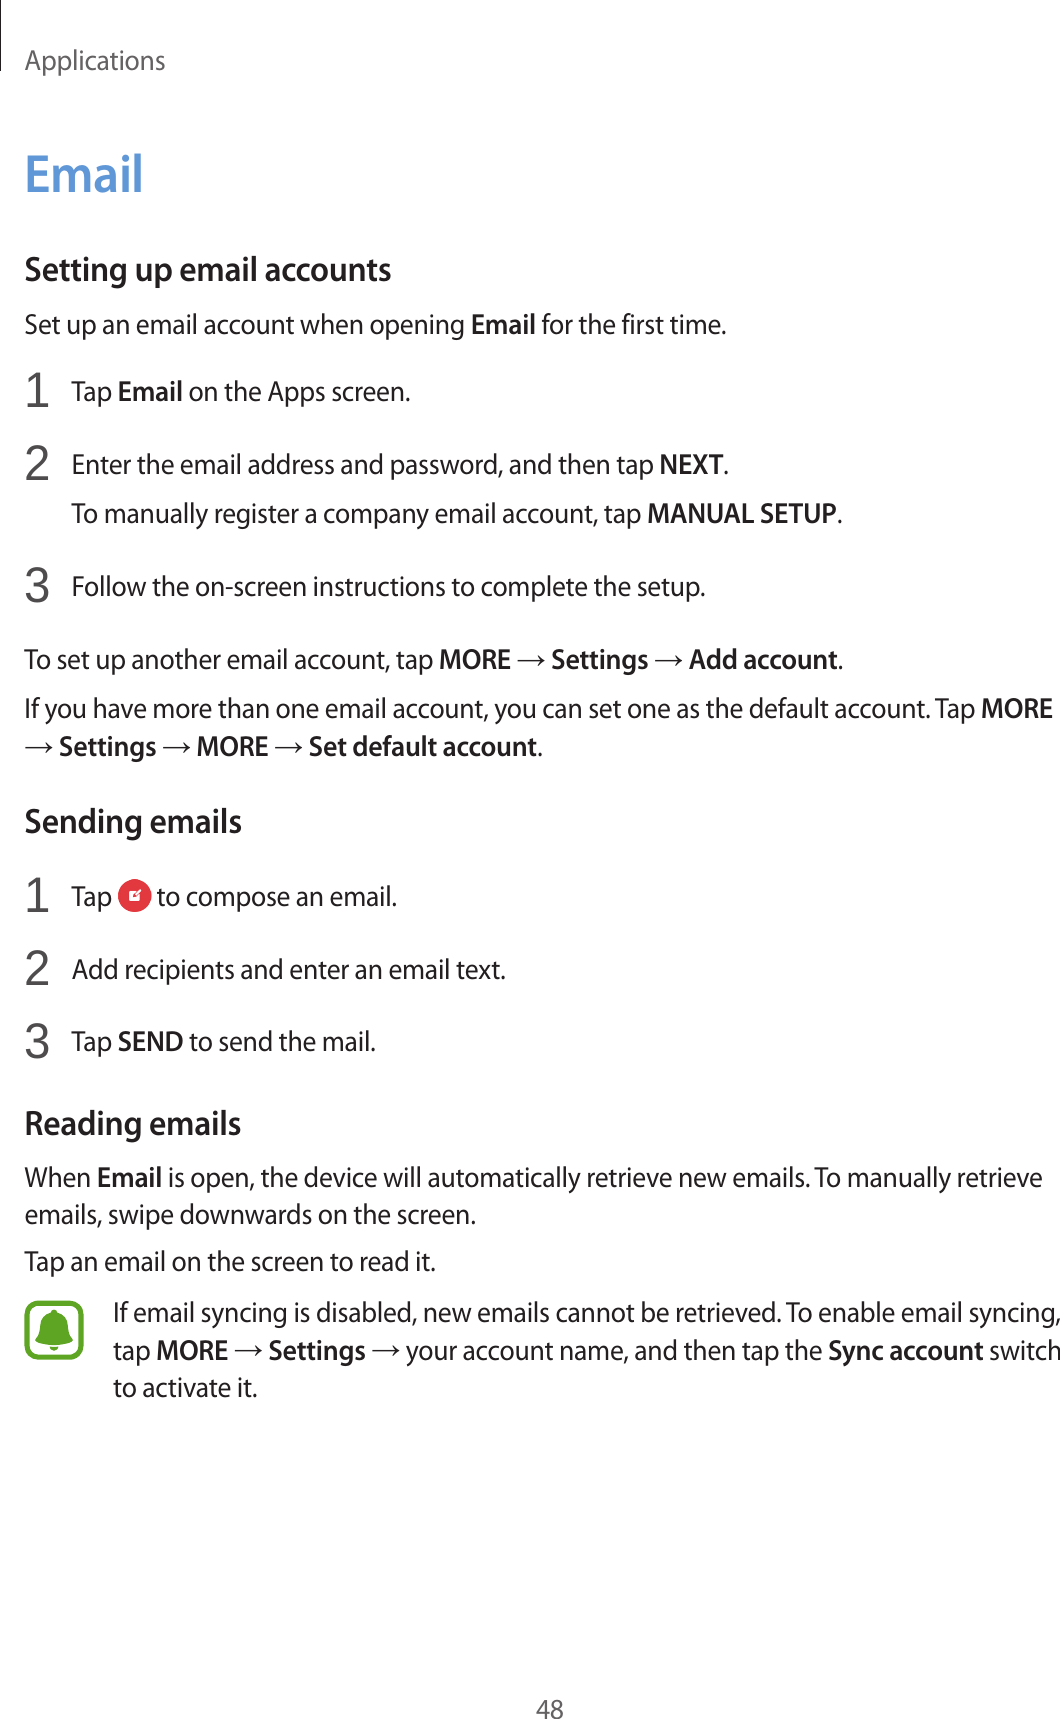 Applications48EmailSetting up email accountsSet up an email account when opening Email for the first time.1  Tap Email on the Apps screen.2  Enter the email address and password, and then tap NEXT.To manually register a company email account, tap MANUAL SETUP.3  Follow the on-screen instructions to complete the setup.To set up another email account, tap MORE → Settings → Add account.If you have more than one email account, you can set one as the default account. Tap MORE → Settings → MORE → Set default account.Sending emails1  Tap   to compose an email.2  Add recipients and enter an email text.3  Tap SEND to send the mail.Reading emailsWhen Email is open, the device will automatically retrieve new emails. To manually retrieve emails, swipe downwards on the screen.Tap an email on the screen to read it.If email syncing is disabled, new emails cannot be retrieved. To enable email syncing, tap MORE → Settings → your account name, and then tap the Sync account switch to activate it.